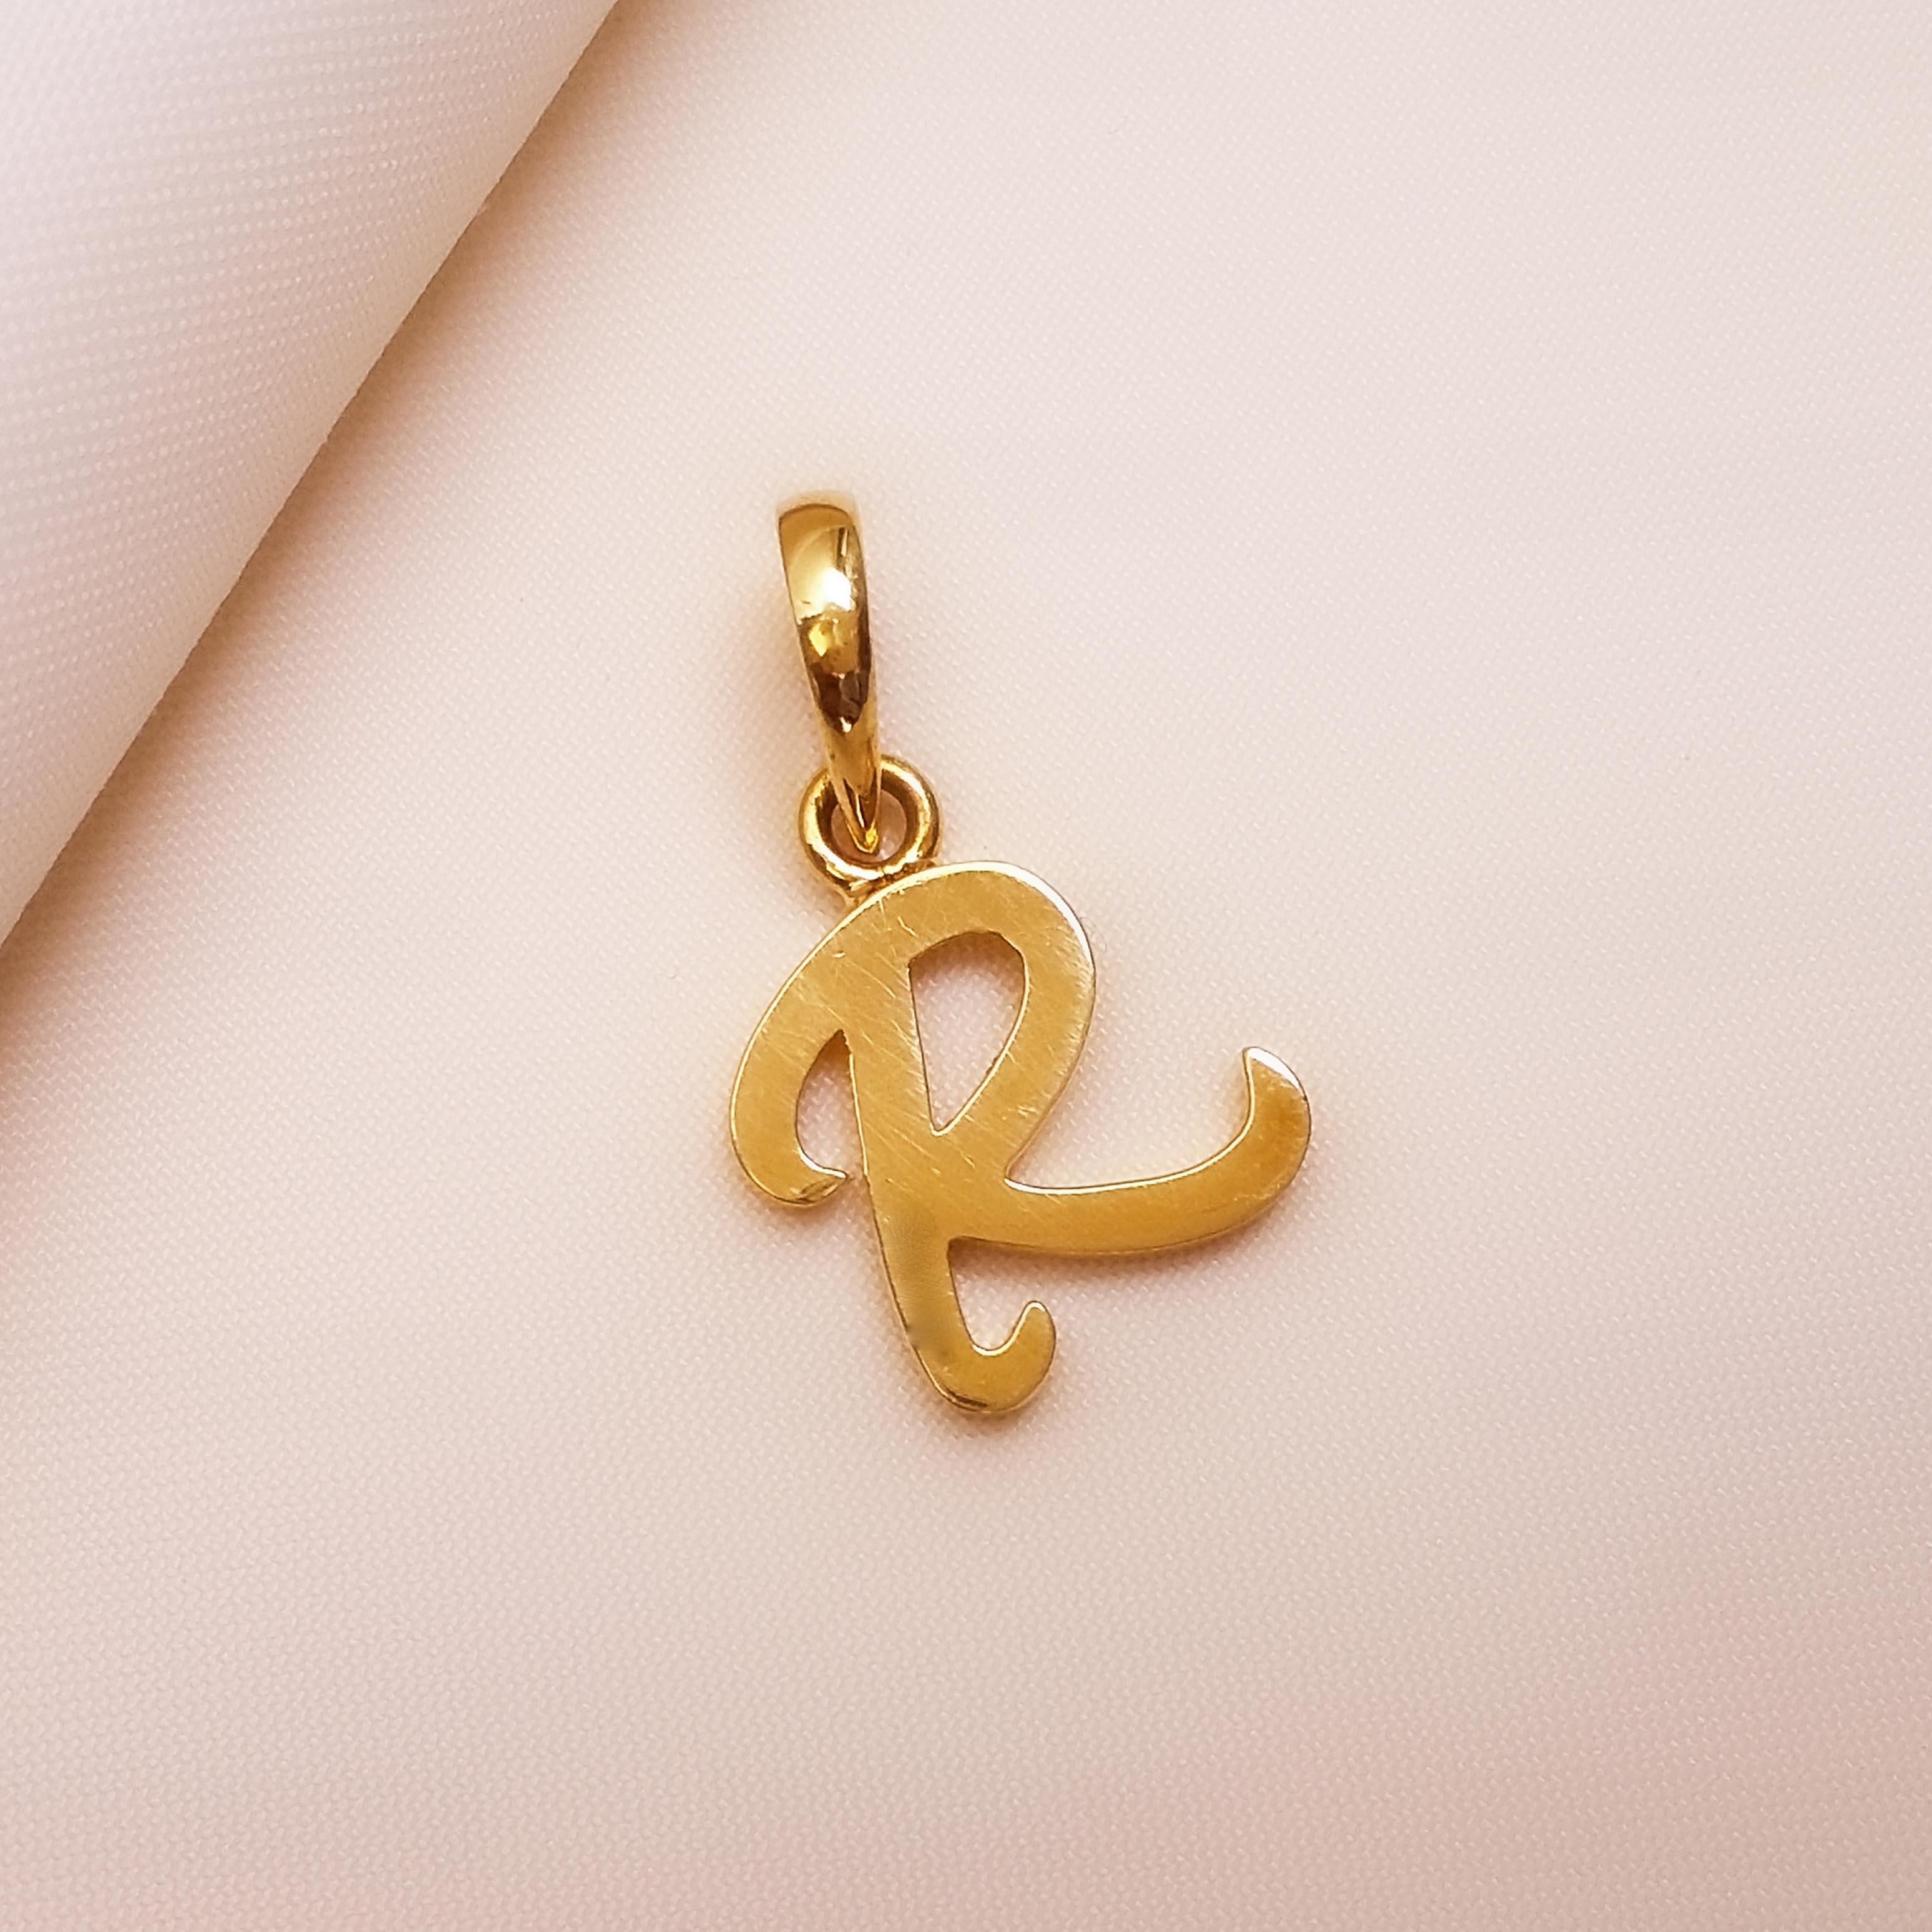 Buy R Reveal Gold Letter Pendant 22 KT yellow gold (1.467 gm). At Best Price In India. Check Pendants New Designs At Giriraj Jewellers. BIS Care, Hallmark, 100% Certified | Trust & Quality of Giriraj Jewellers India | letter r pendant | r name pendant | r alphabet pendant | r name ka locket